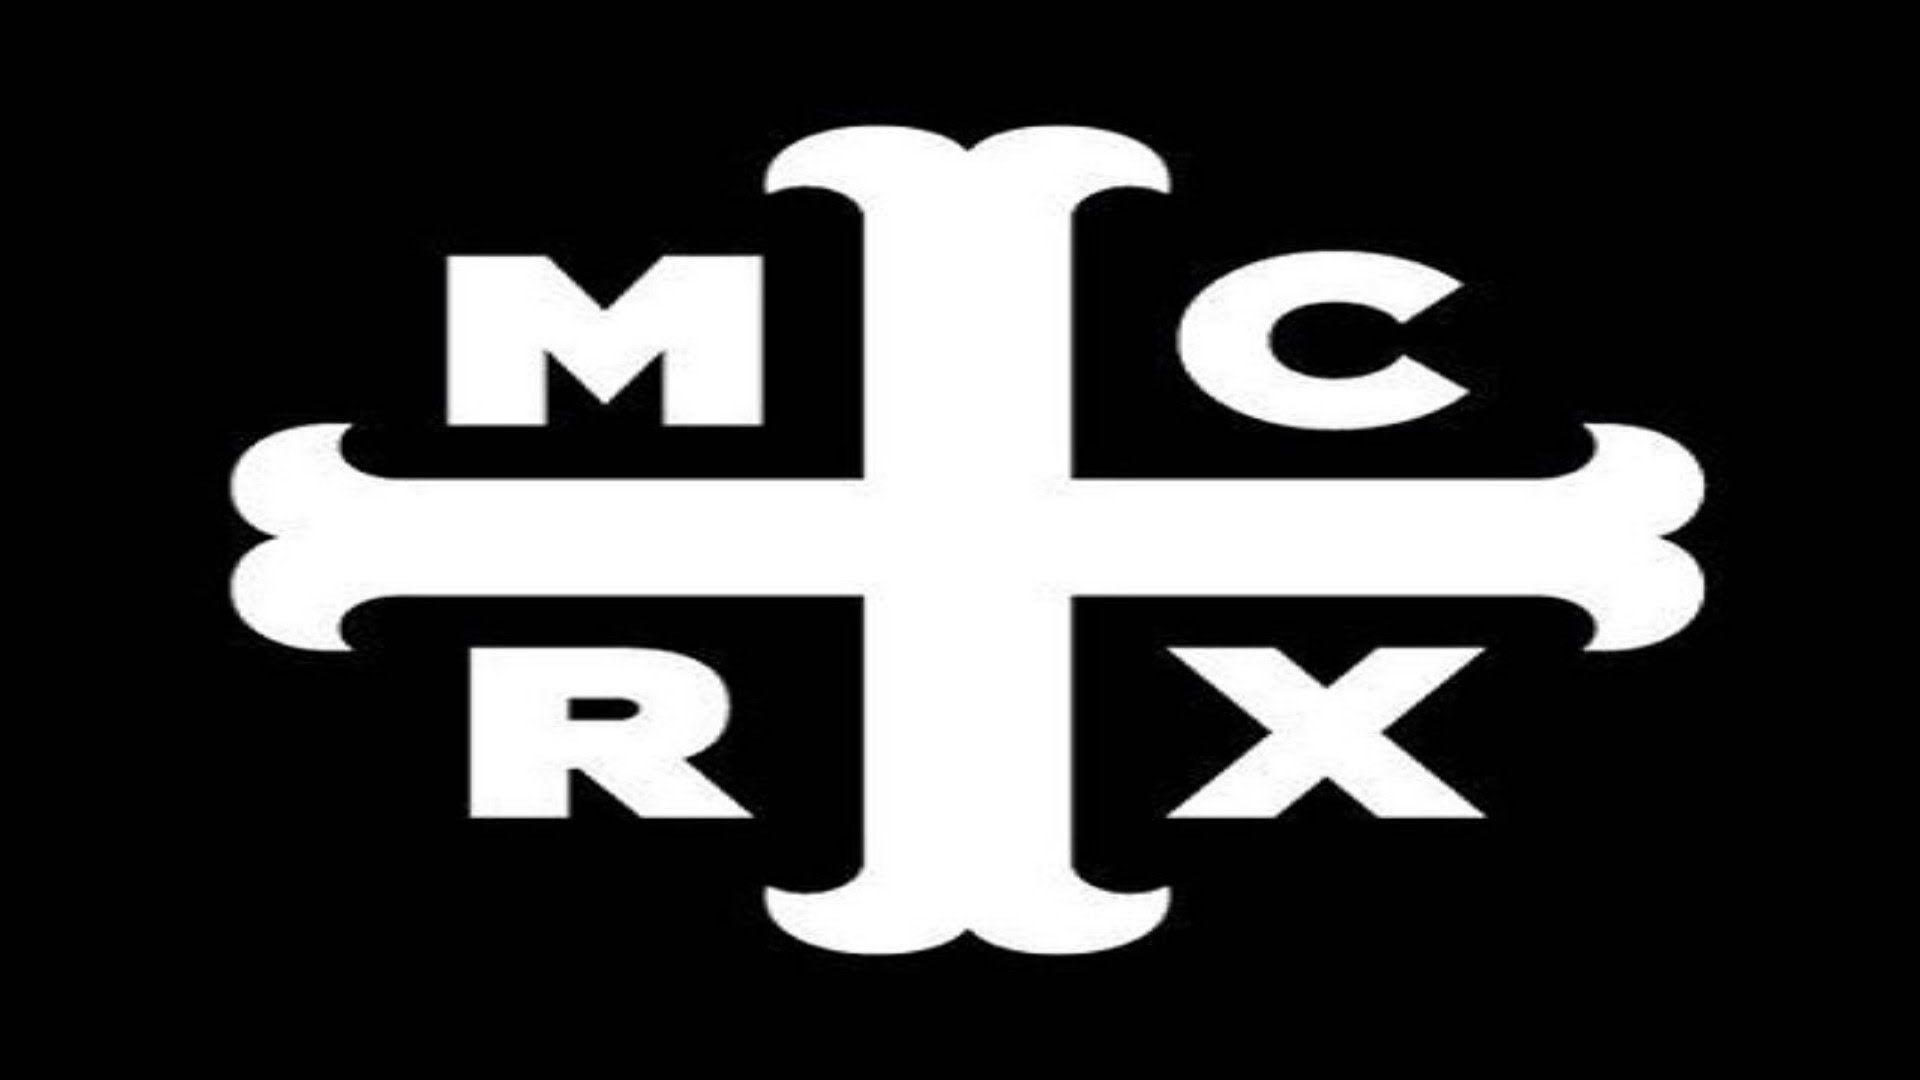 Mcrx Logo - Mcr drawing mcrx for free download on ayoqq clipart